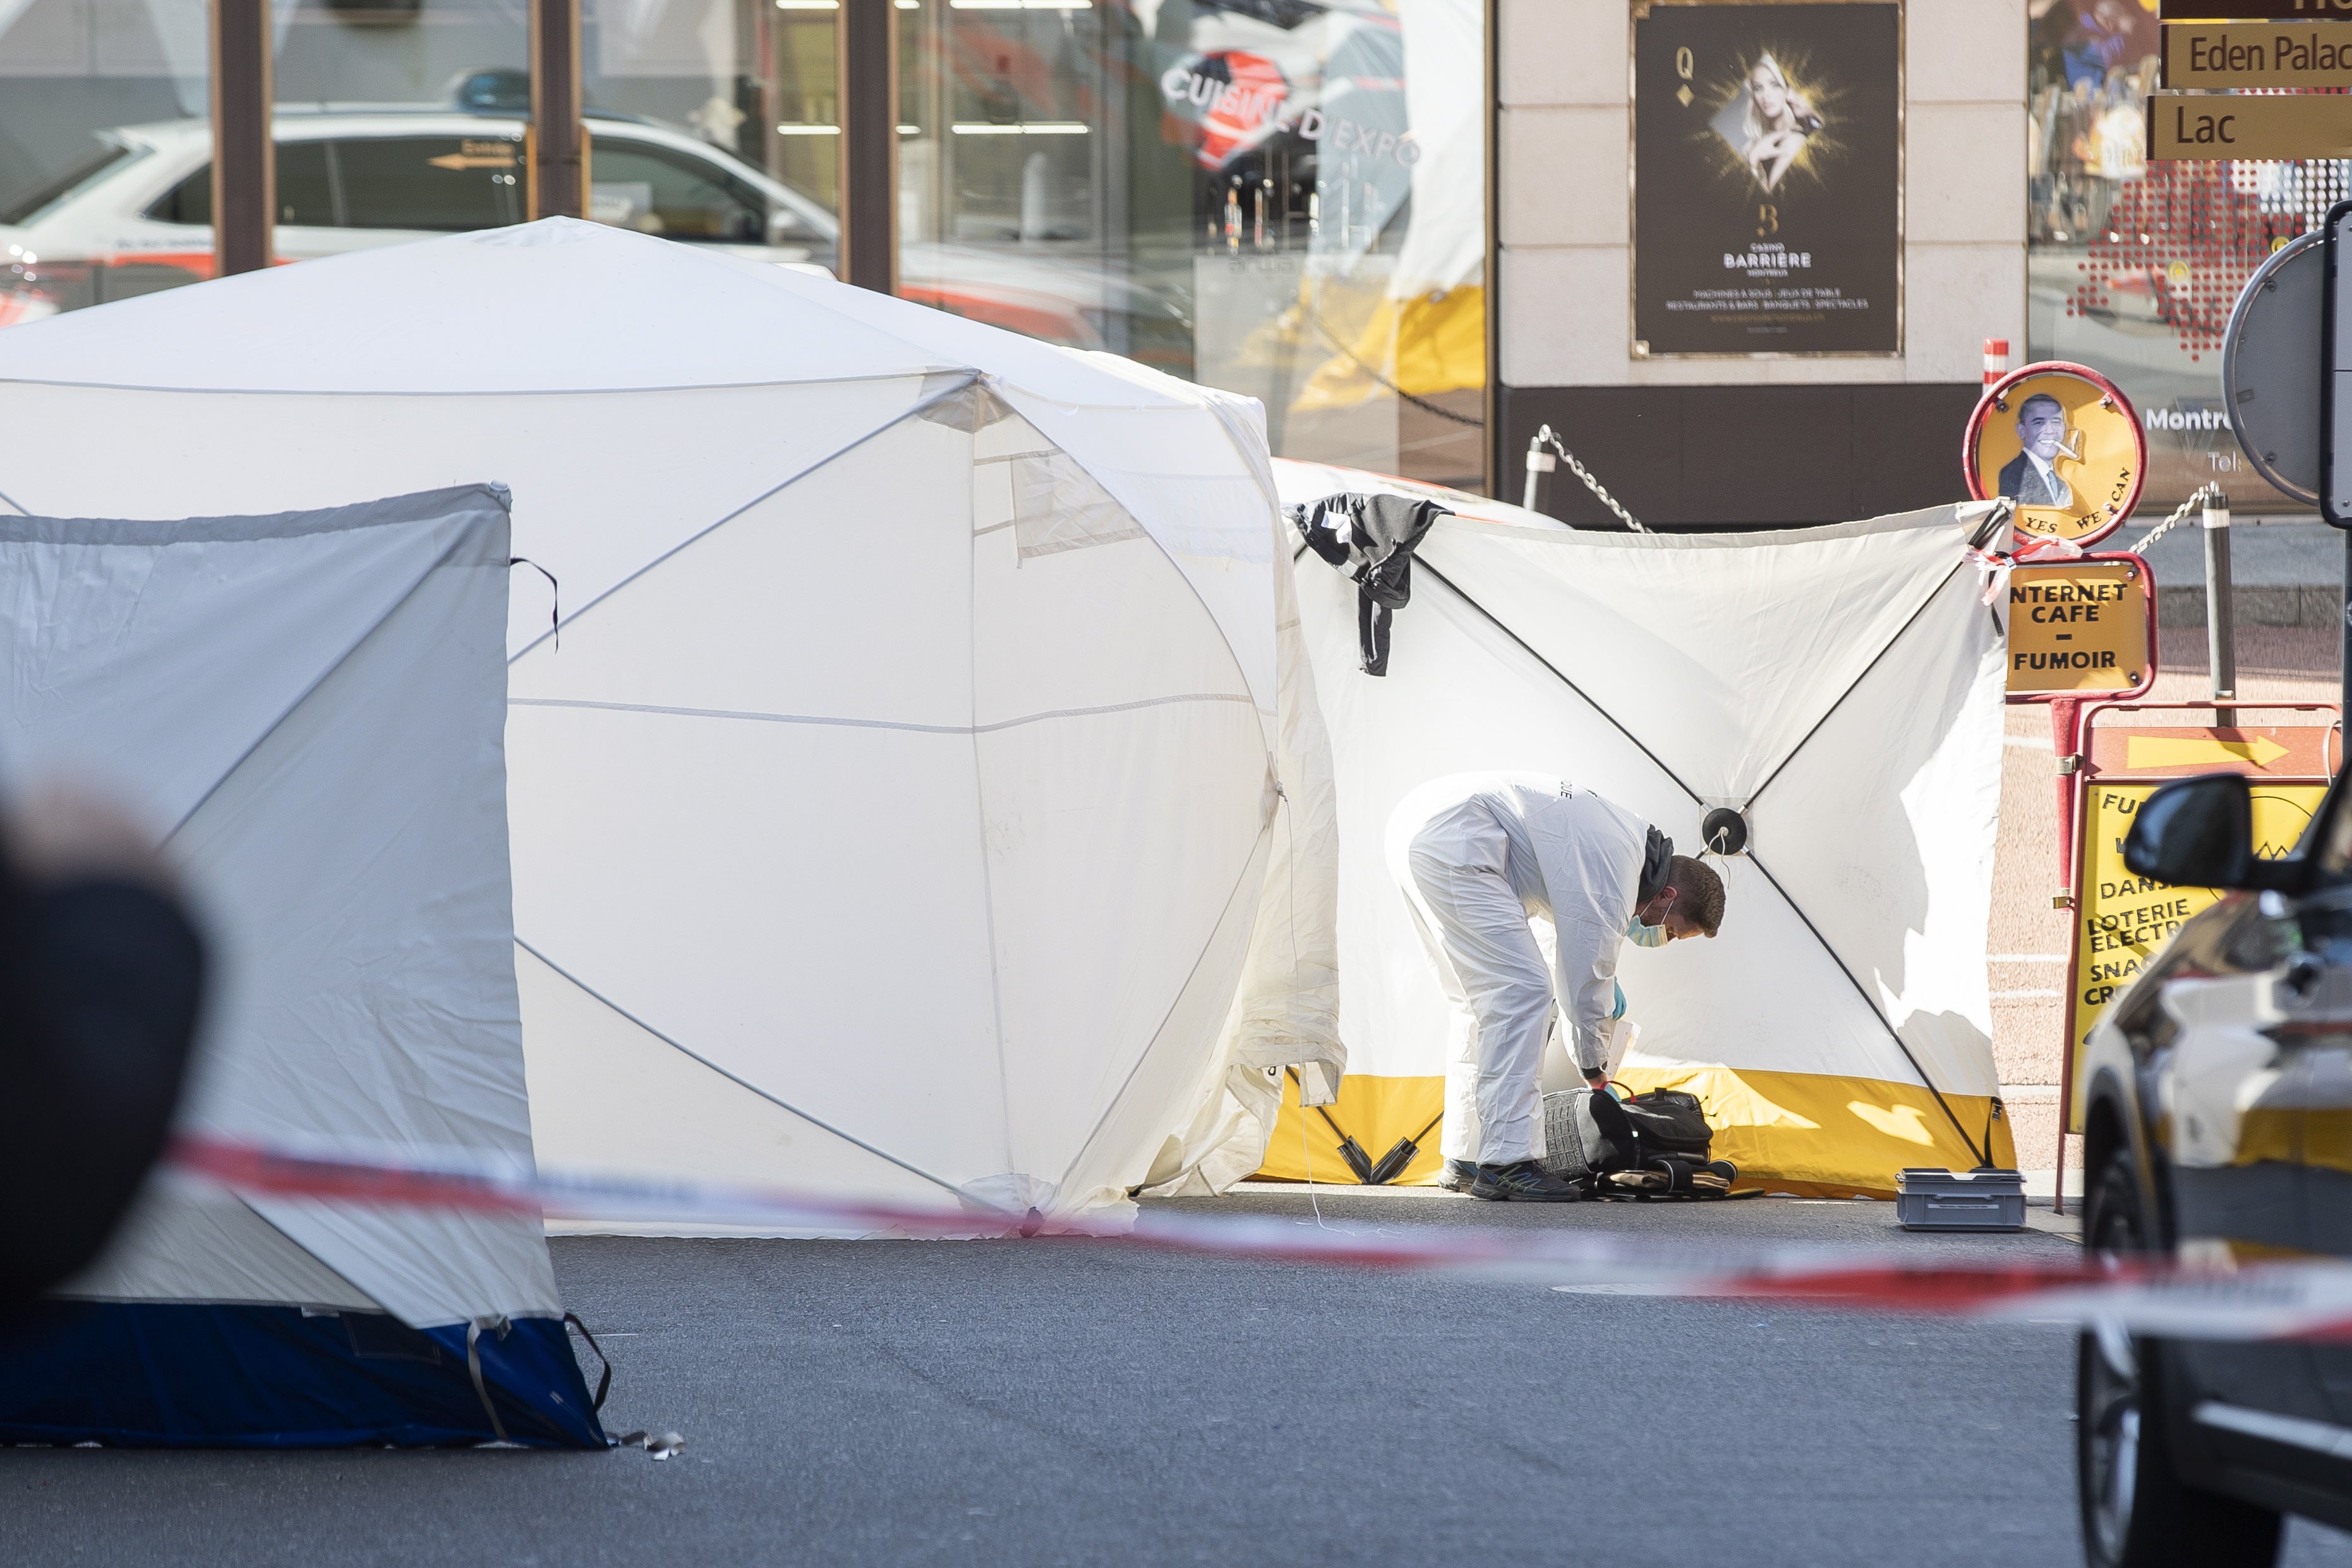 A forensic officer from the Vaud cantonal police investigates at the scene of the tragedy where four people died and one was seriously injured after falling from their flat in Montreux